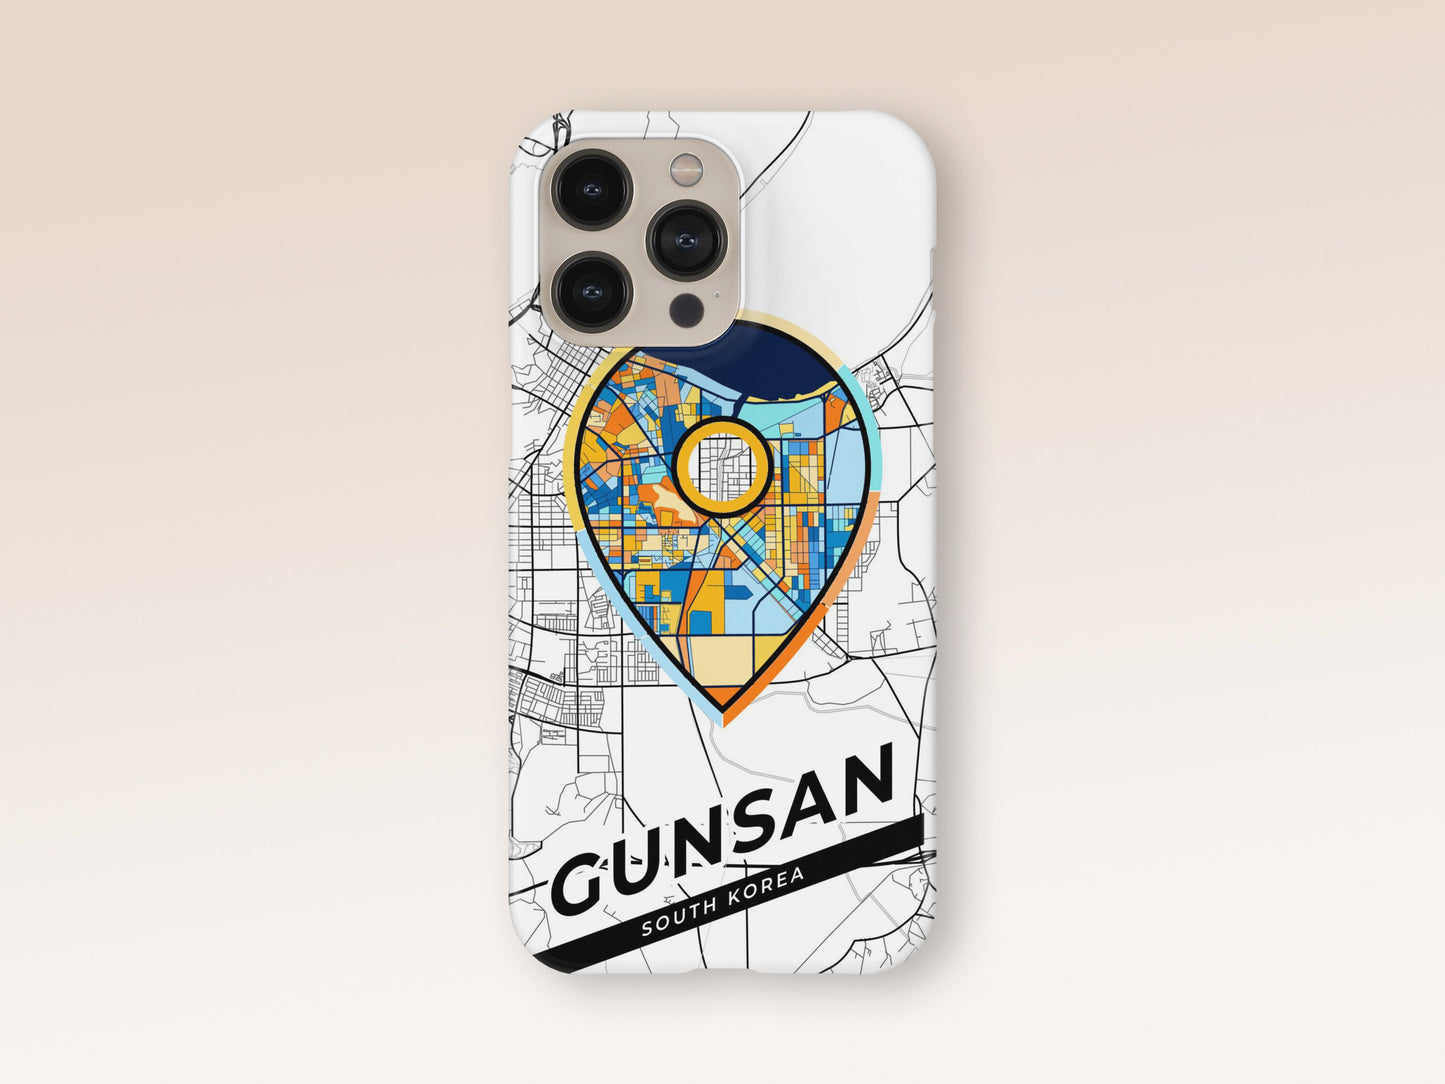 Gunsan South Korea slim phone case with colorful icon. Birthday, wedding or housewarming gift. Couple match cases. 1